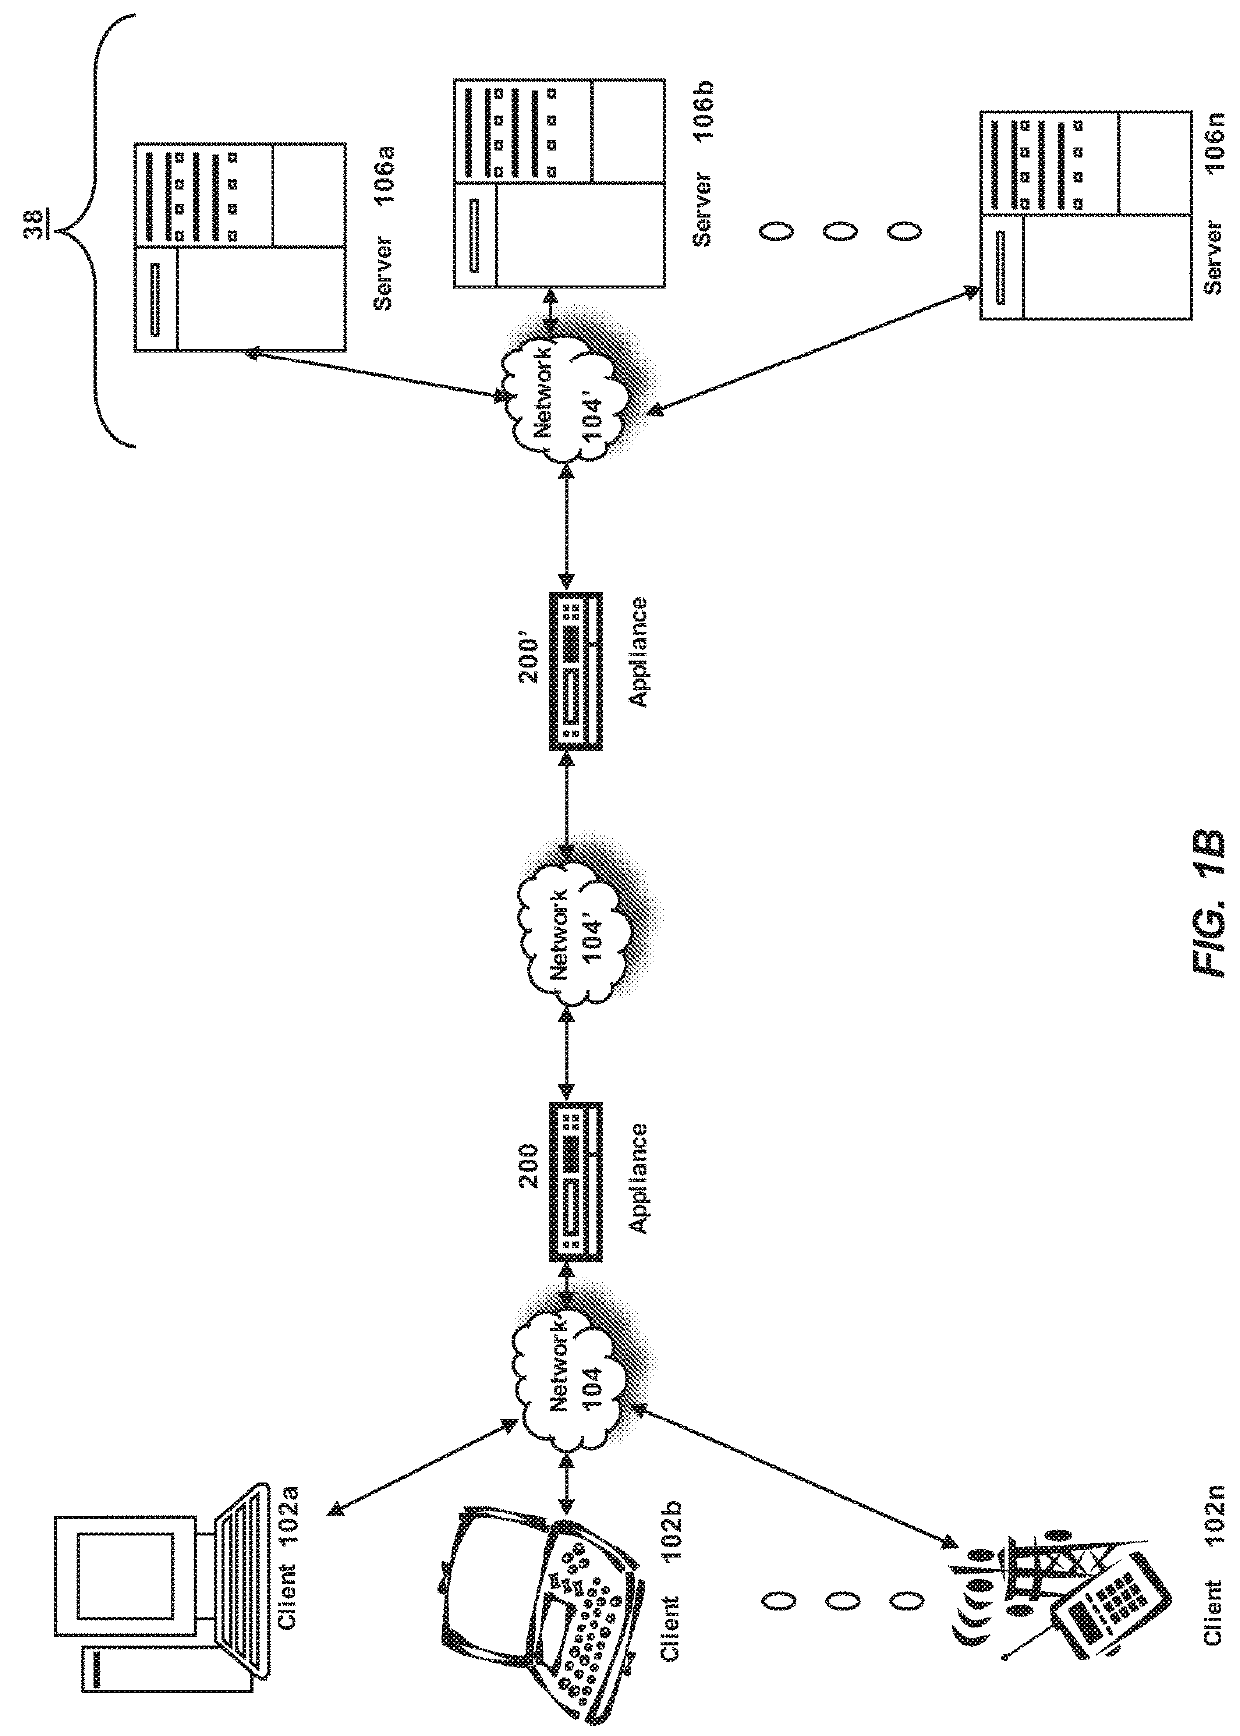 Method for DNS response reordering based on path quality and connection priority for better QOS